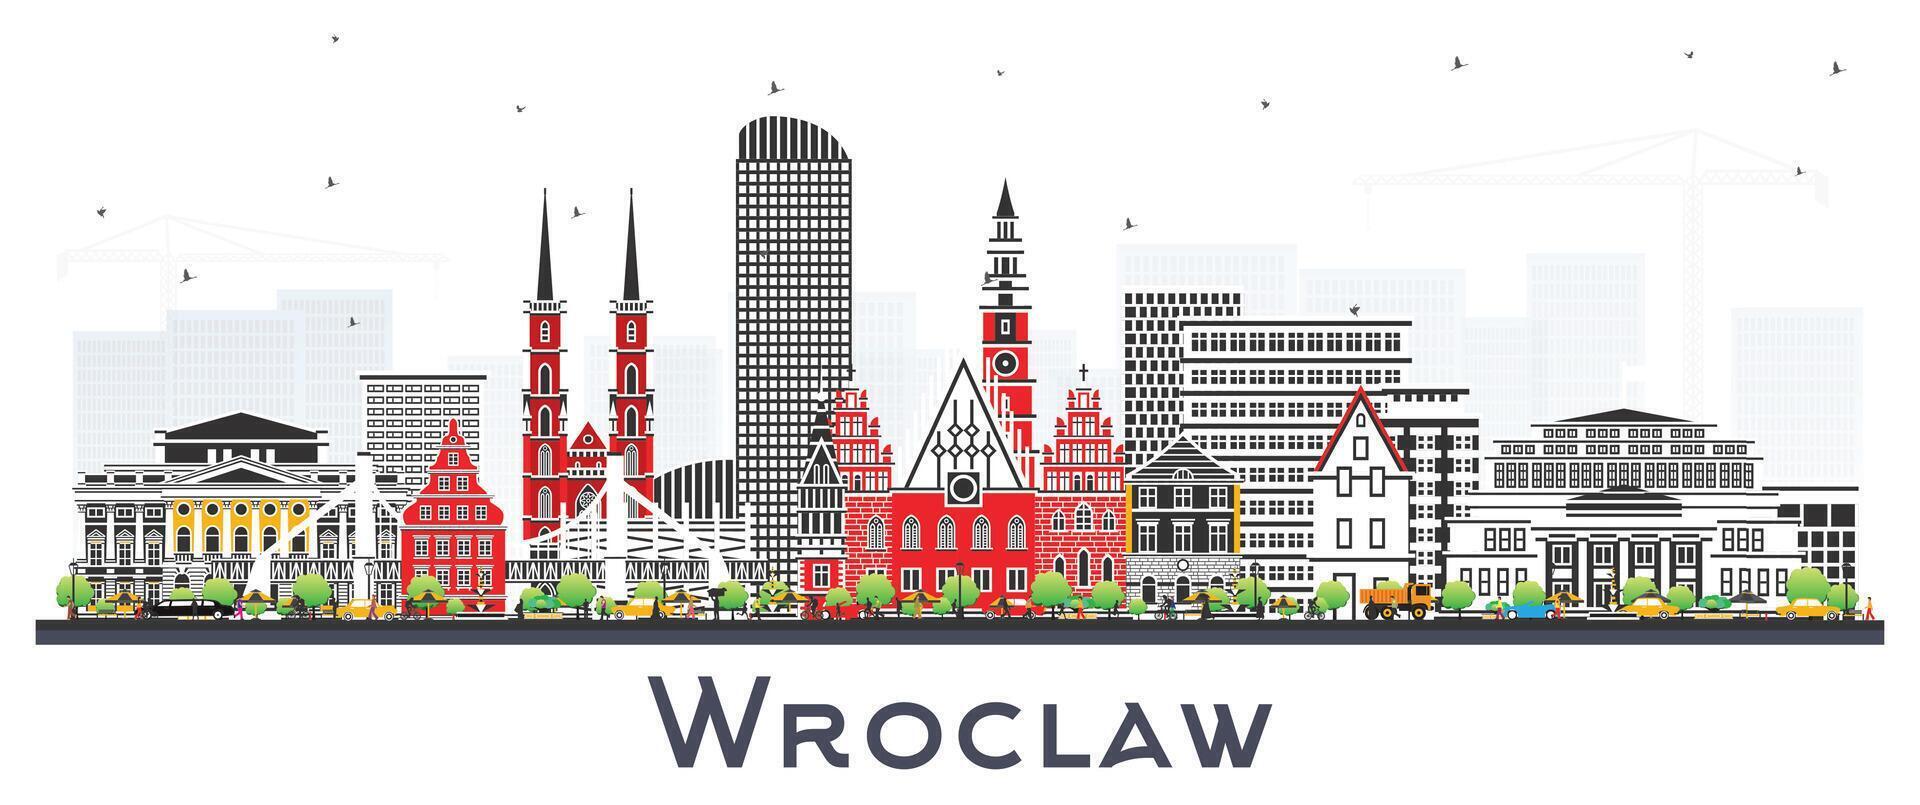 Wroclaw Poland City Skyline with Color Buildings isolated on white. Wroclaw Cityscape with Landmarks. Business Travel and Tourism Concept with Historic Architecture. vector